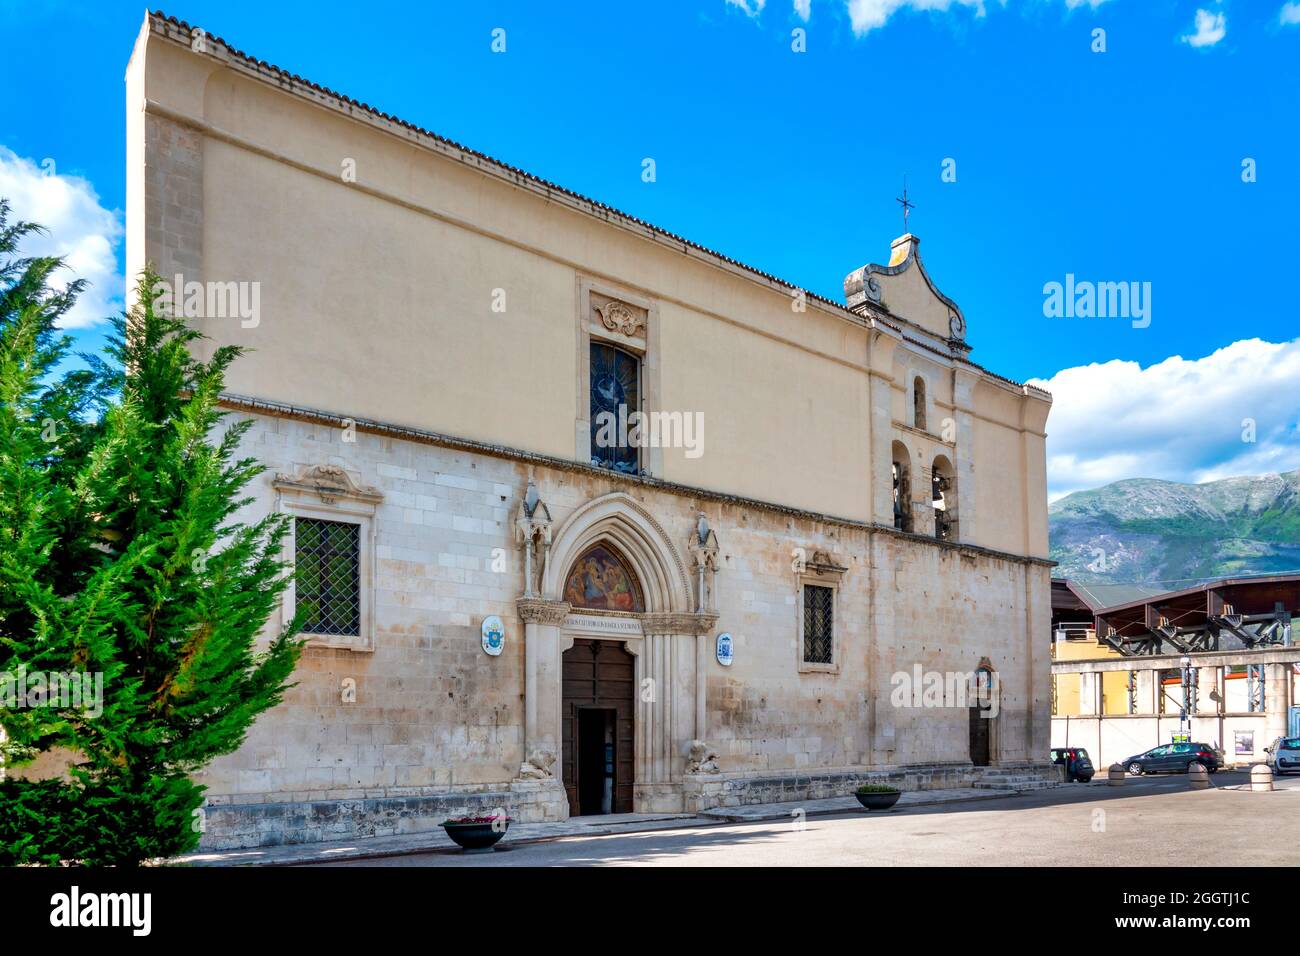 Facade of the Cathedral of San Panfilo, Sulmona Italy Stock Photo